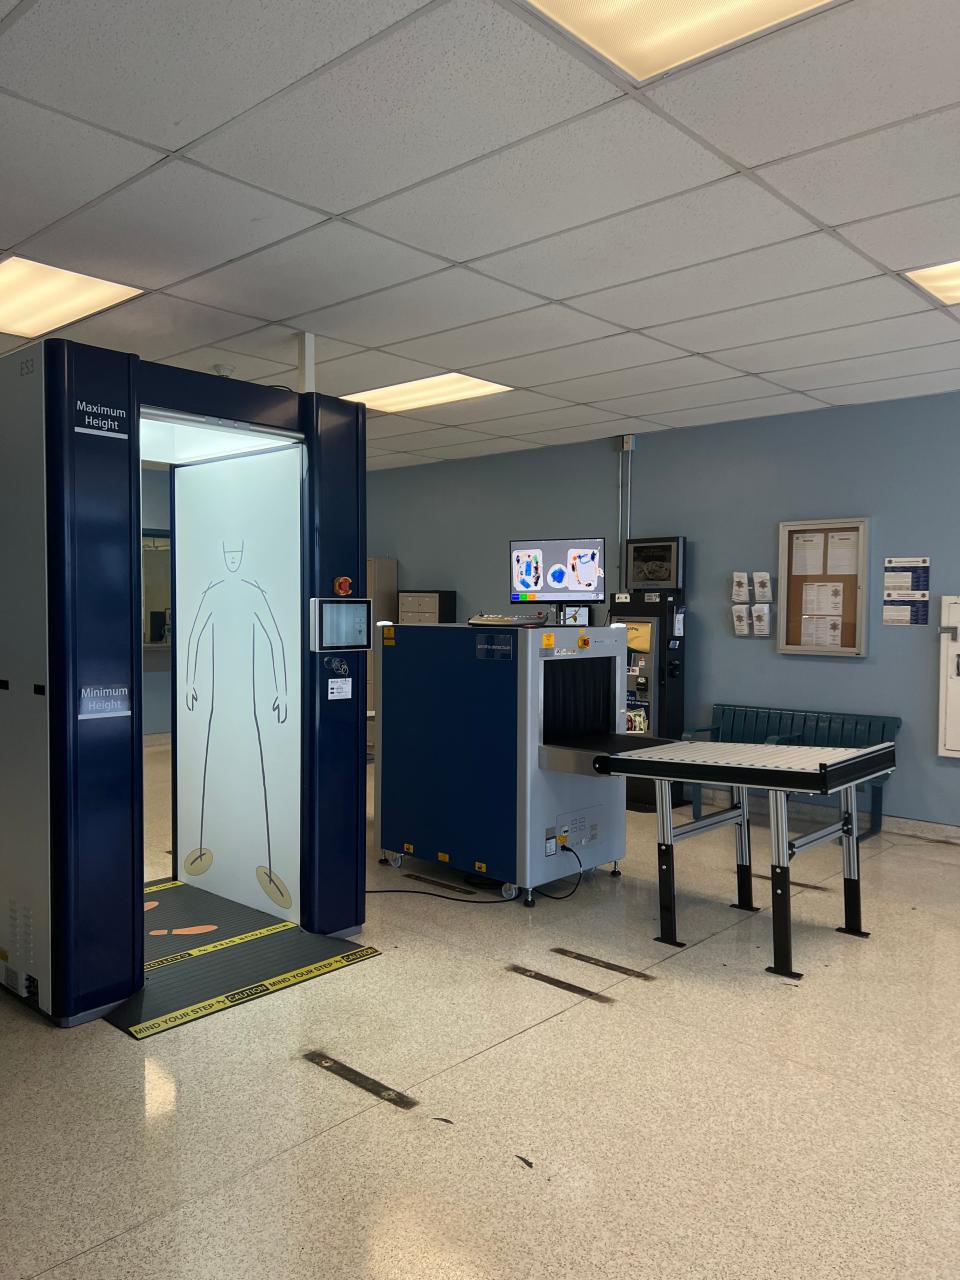 A picture provided by the Maricopa County, Arizona Sheriff's Office shows a body scanner manufactured by a Chinese company installed in one of the jails.